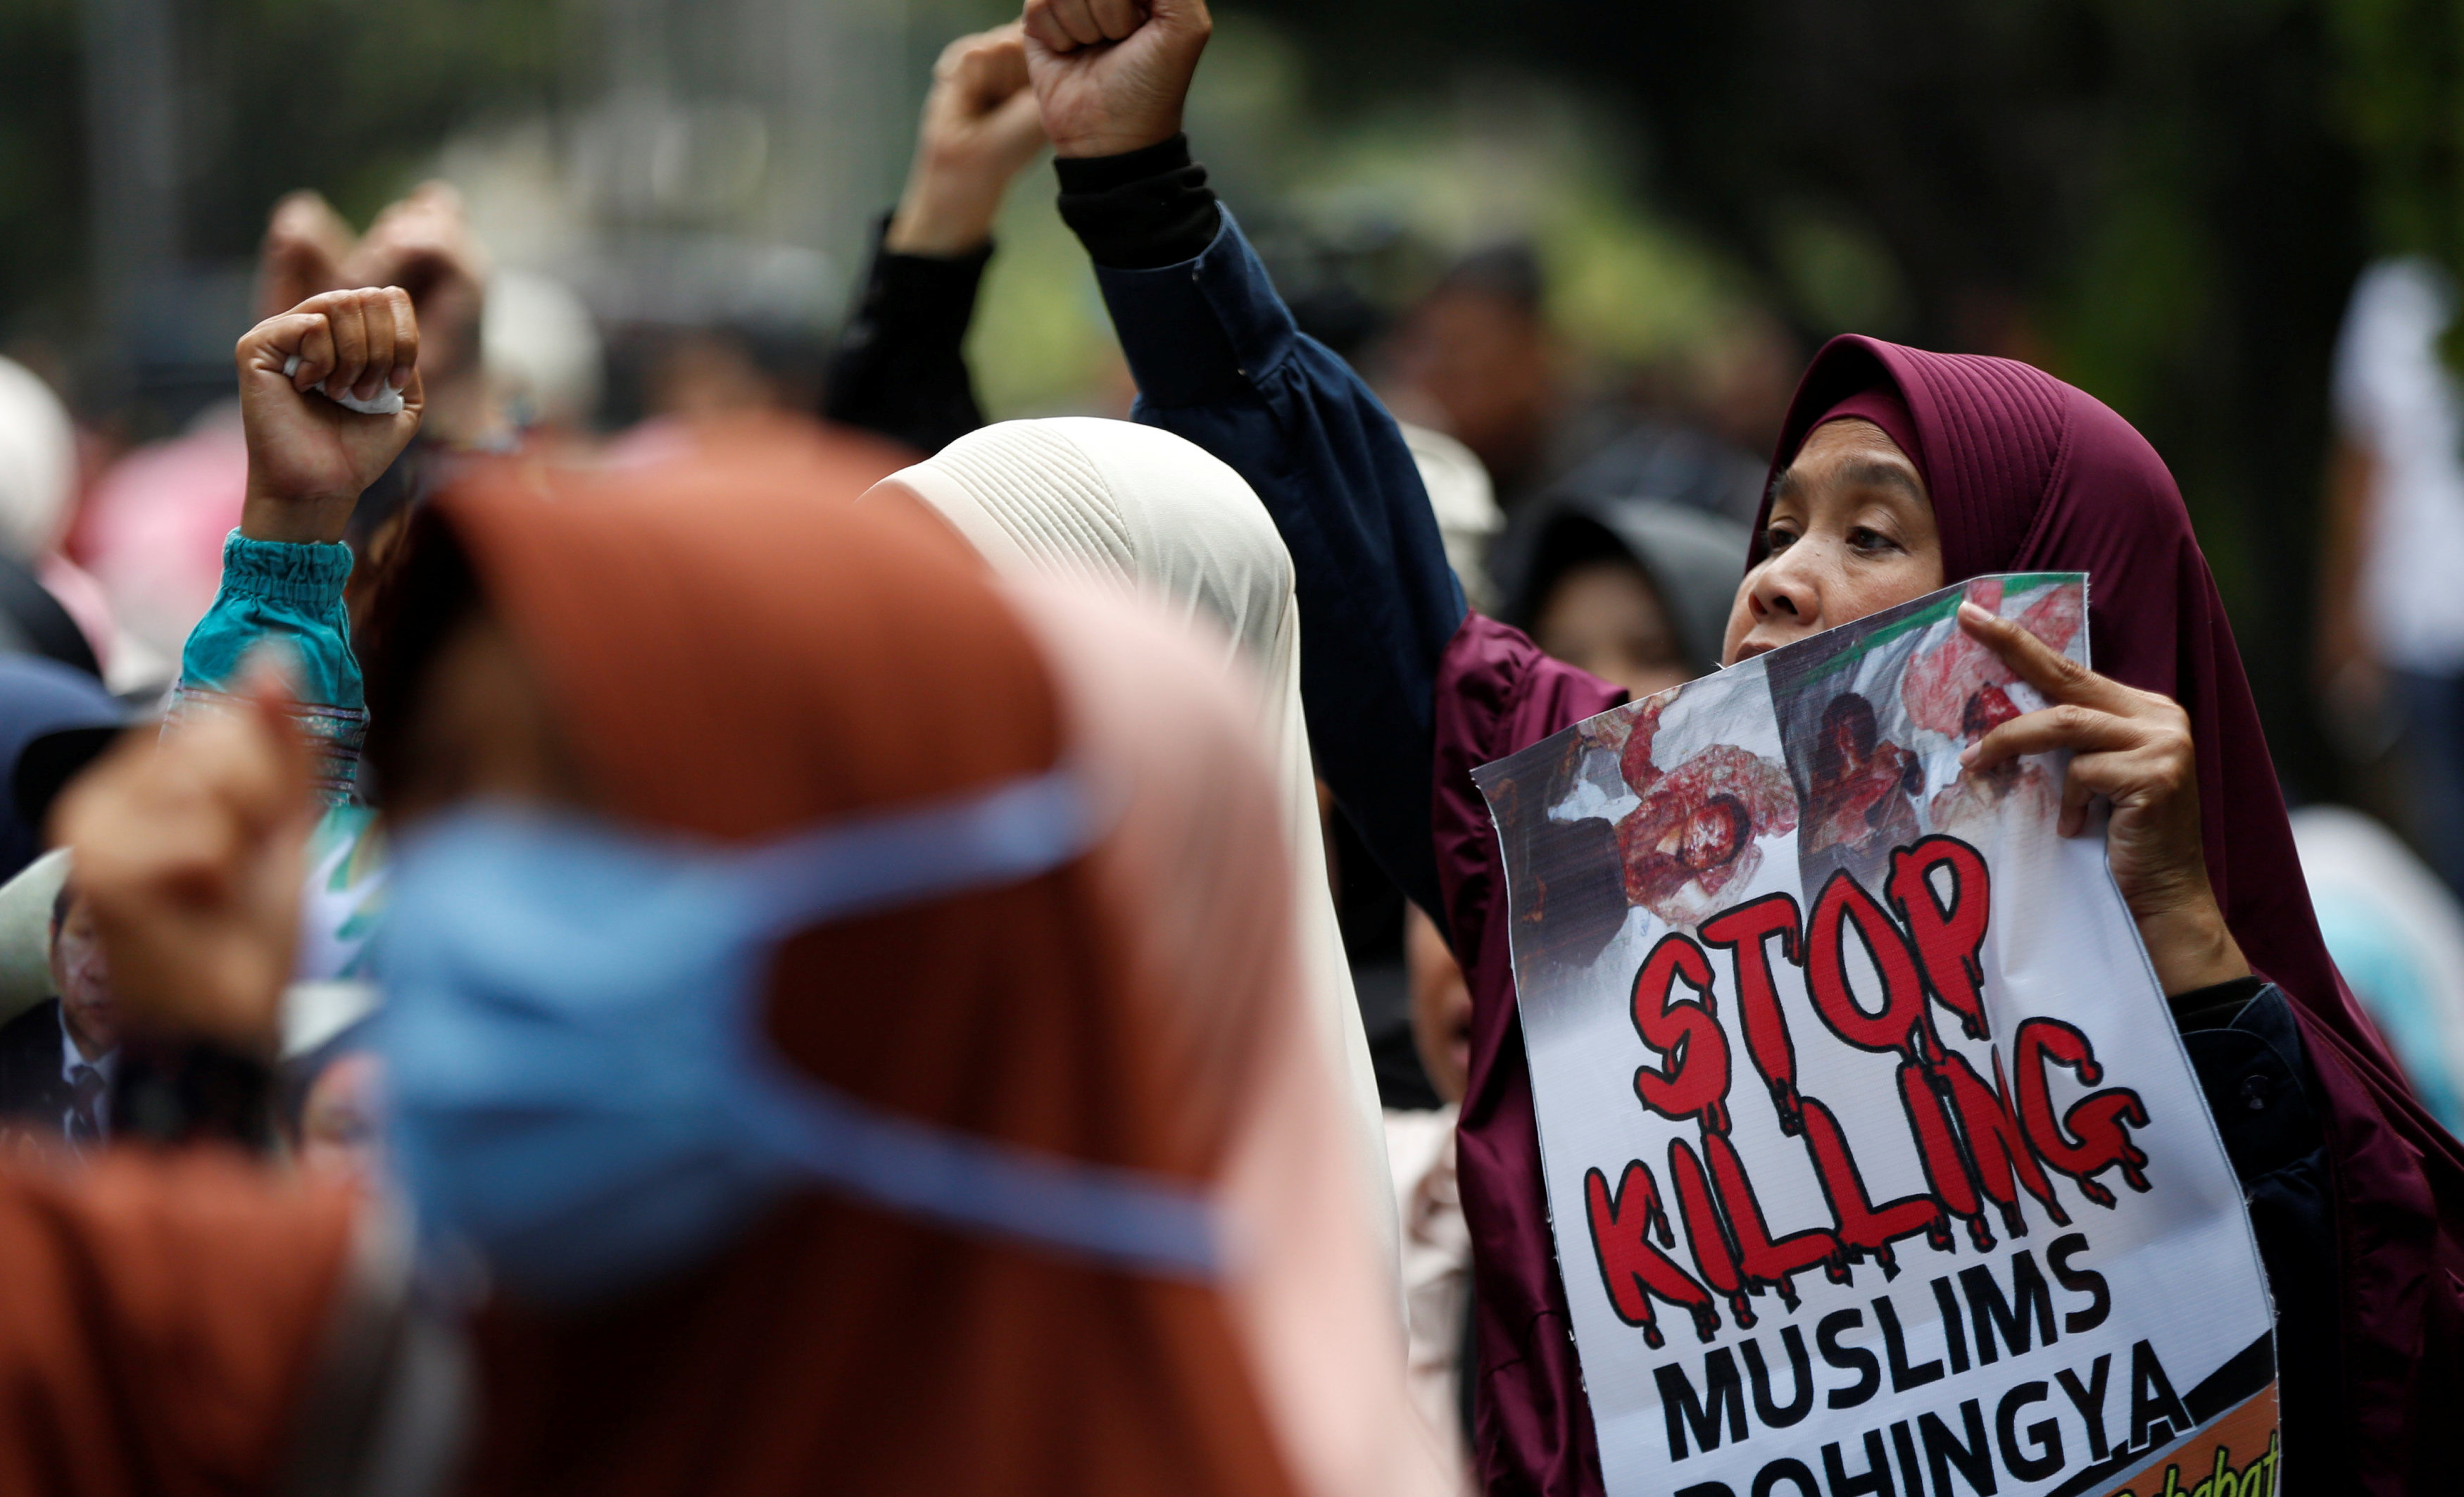 Muslim women activists take part in a rally in support of Myanmar's Rohingya minority during one of the deadliest bouts of violence involving the Muslim minority in decades outside the Myanmar embassy in Jakarta, Indonesia September 4, 2017.